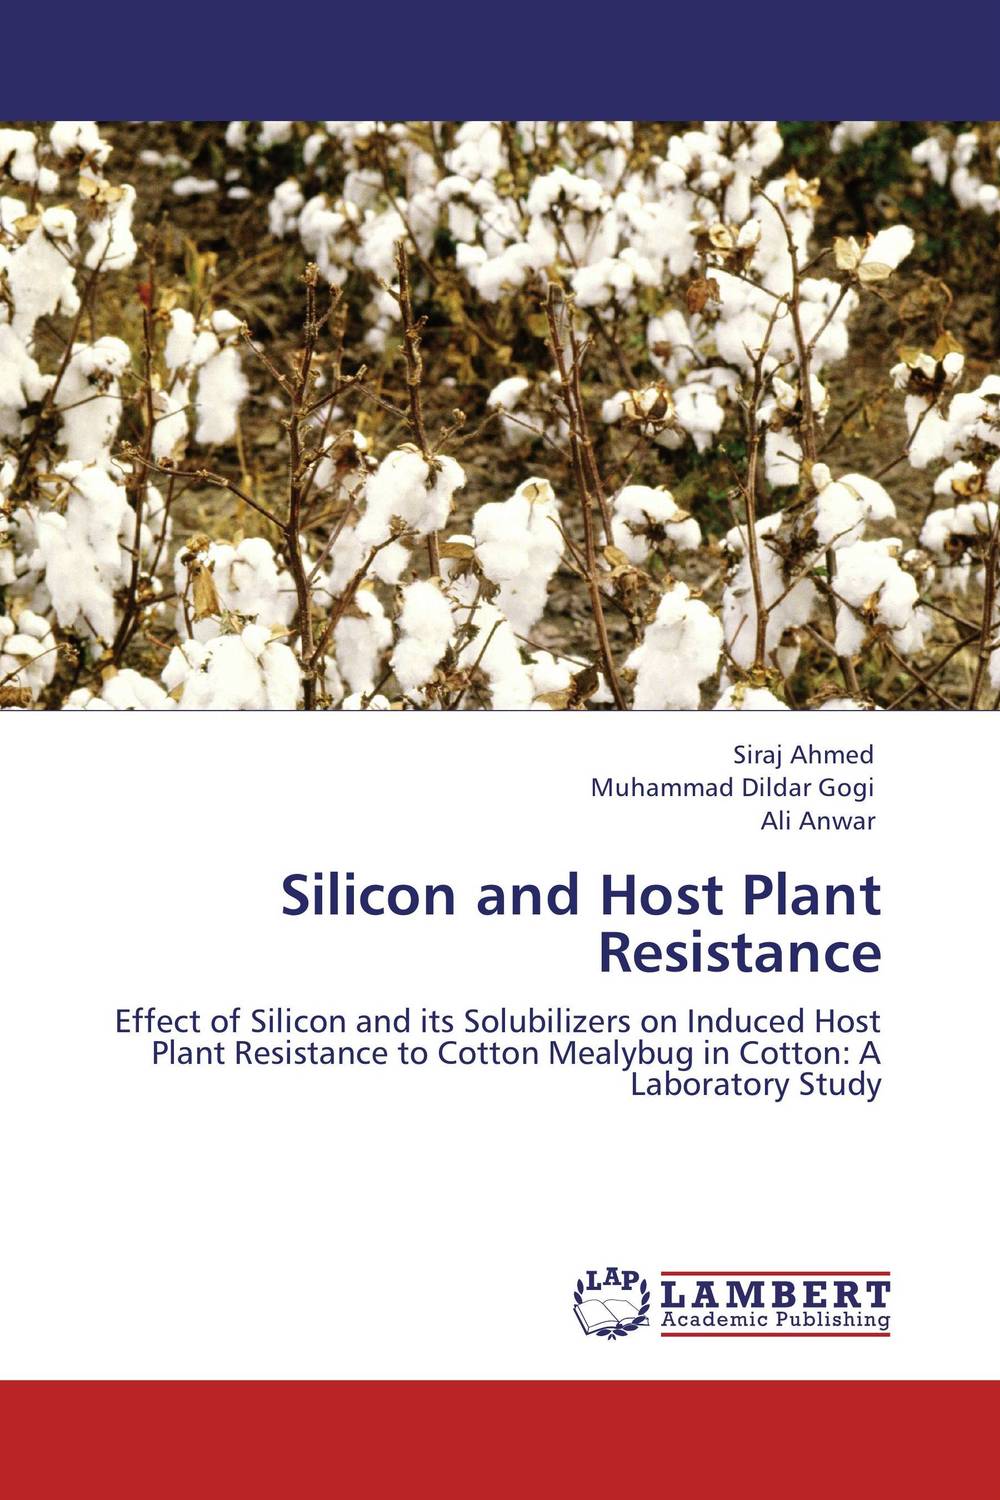 Silicon and Host Plant Resistance